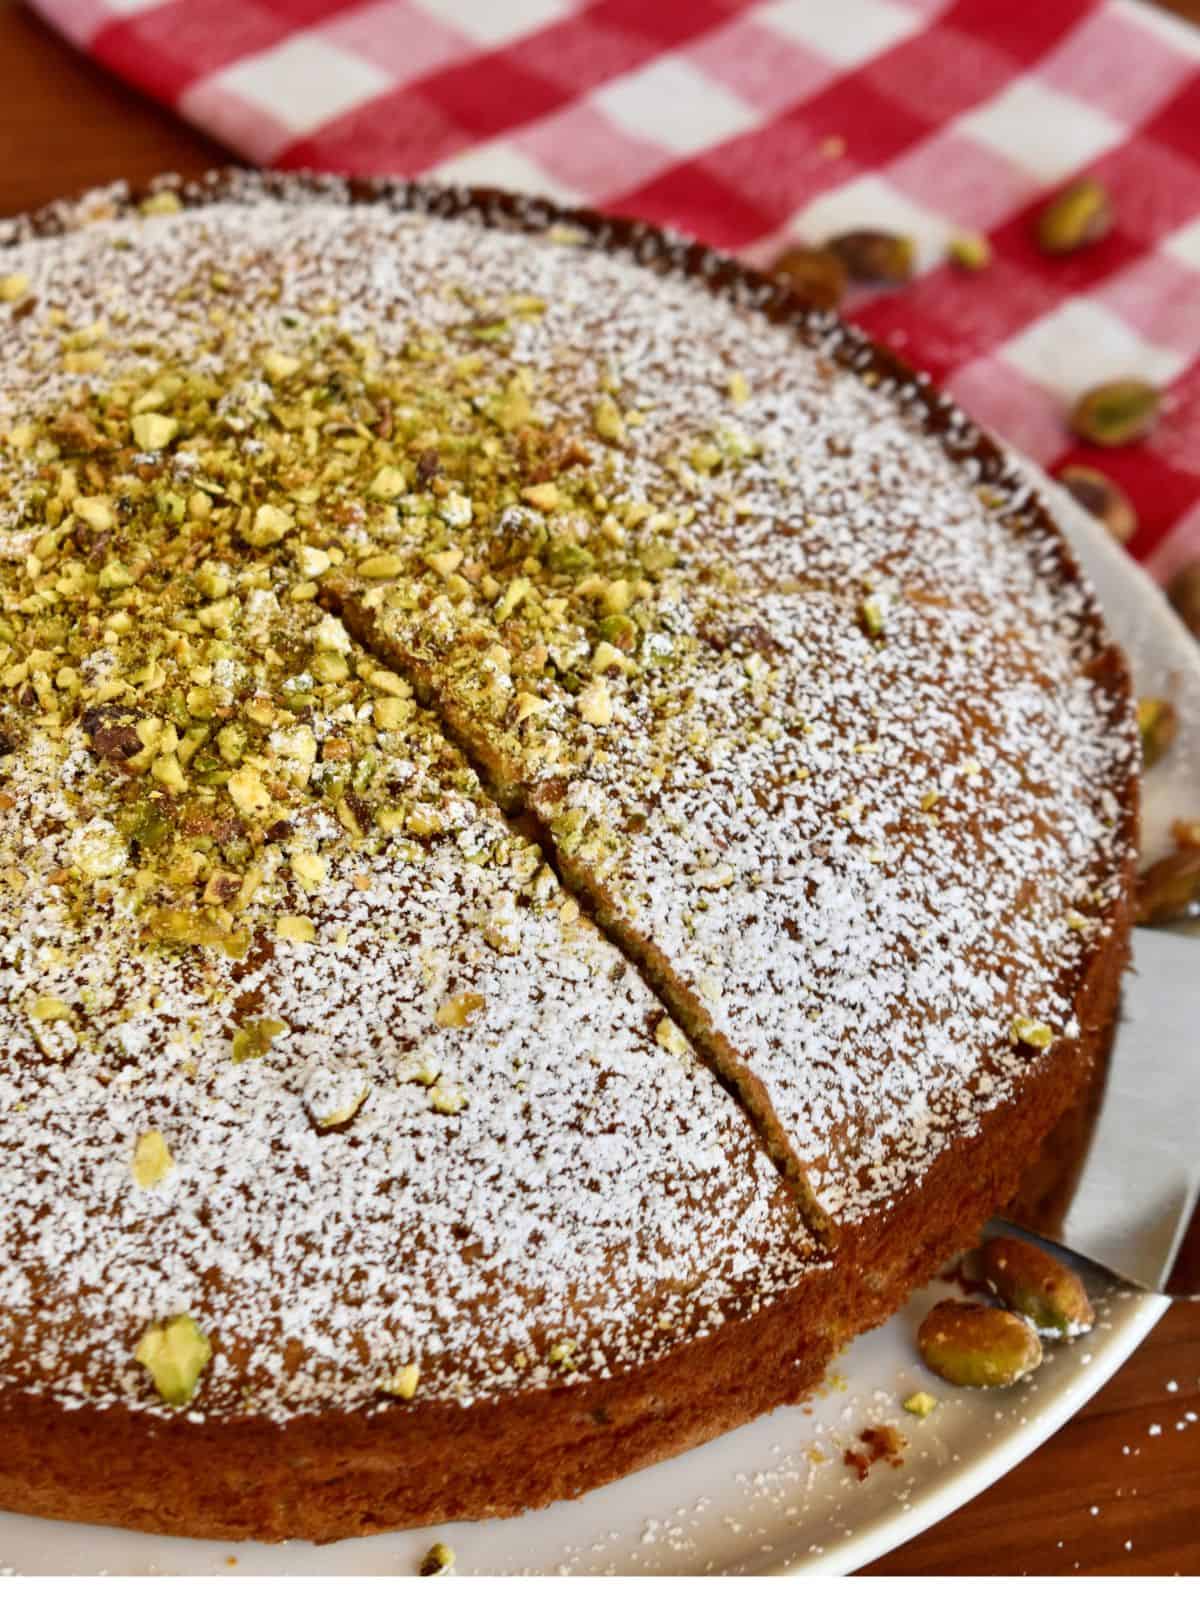 Italian Pistachio Cake on a plate with a checkered napkin in the background.